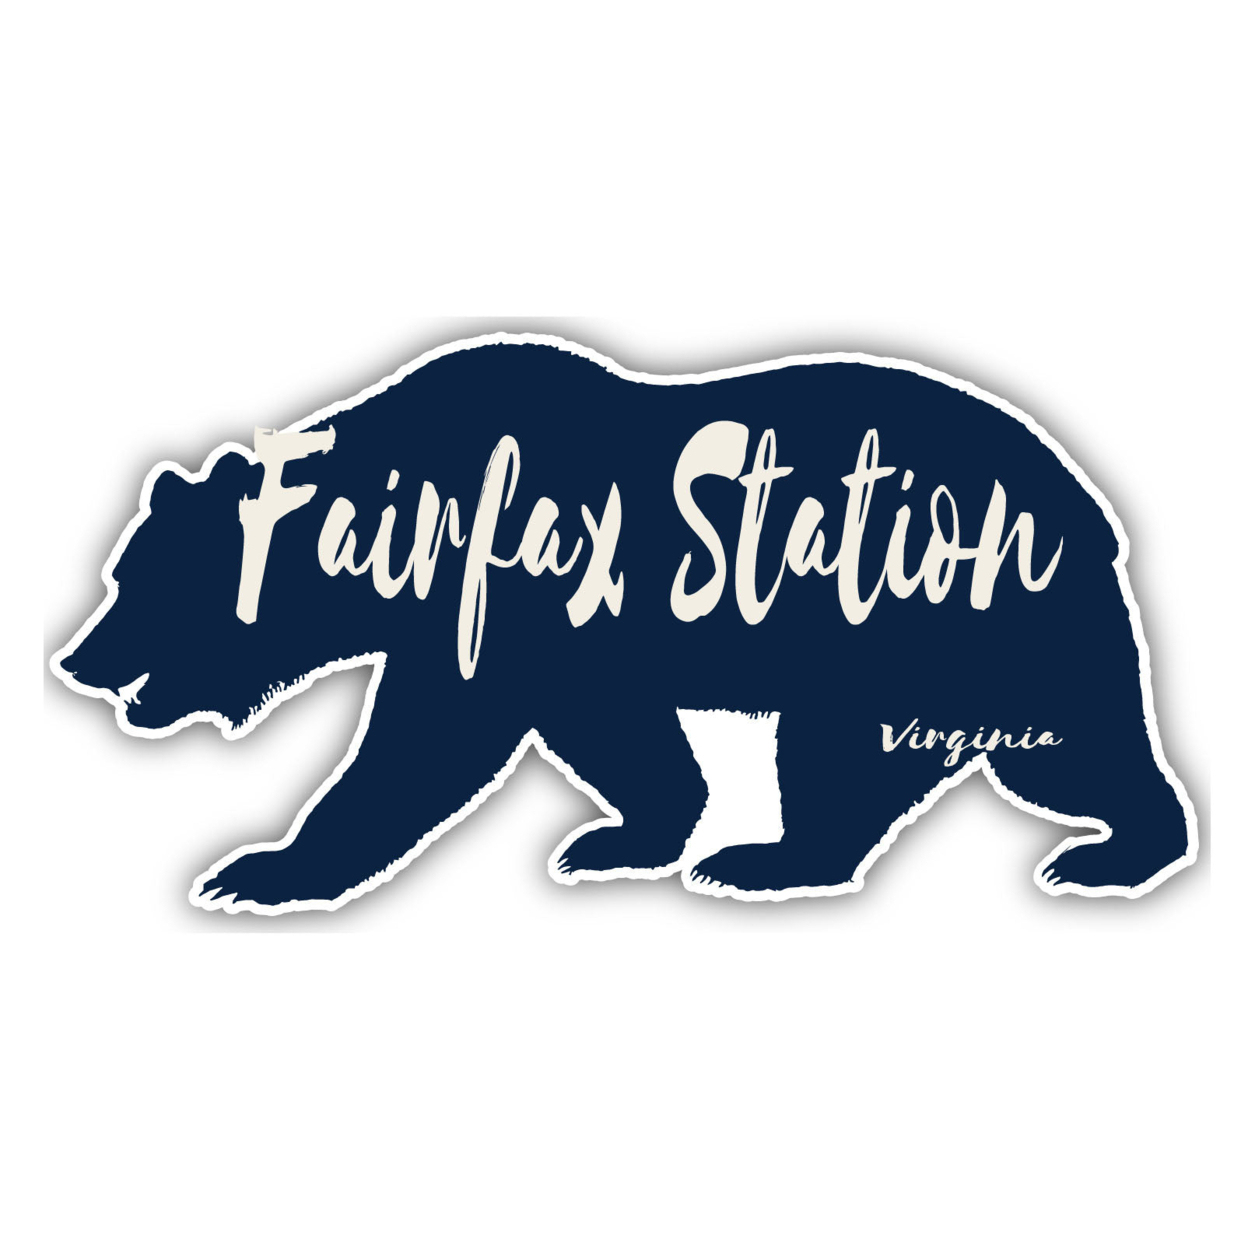 Fairfax Station Virginia Souvenir Decorative Stickers (Choose Theme And Size) - 4-Pack, 12-Inch, Bear